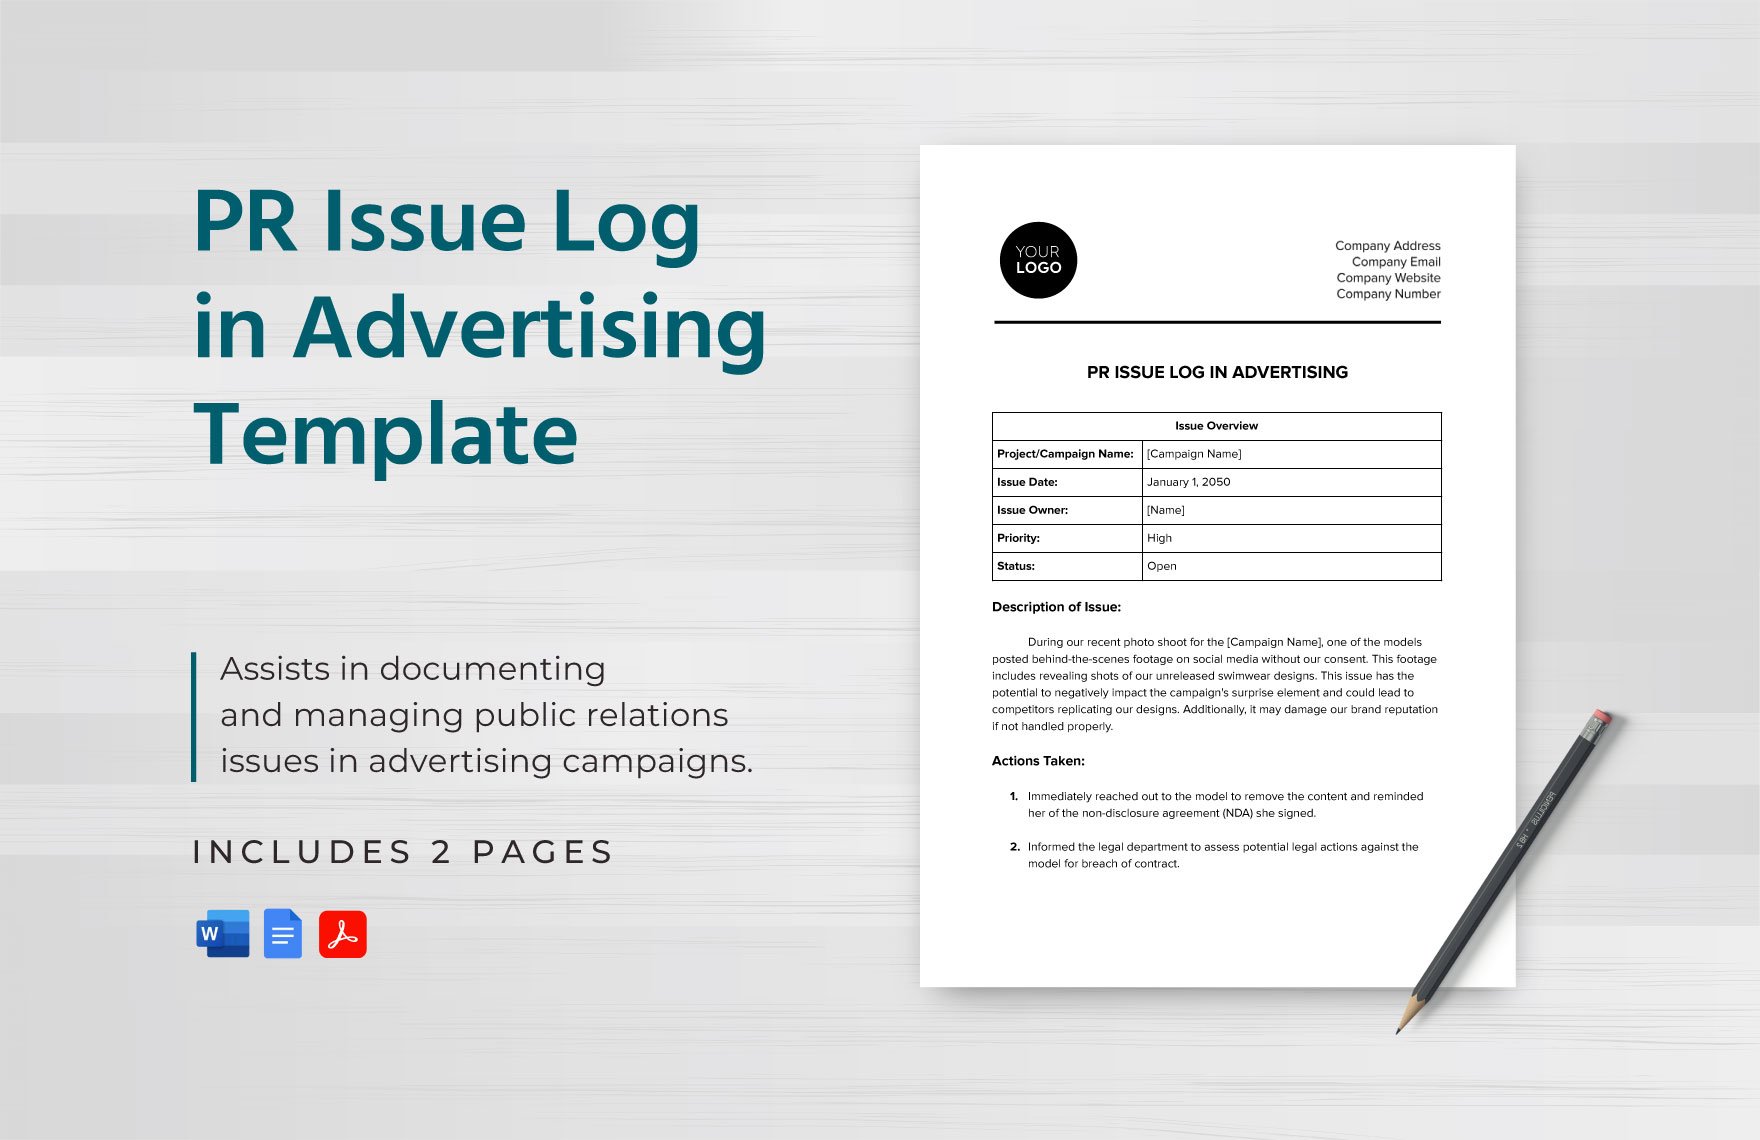 PR Issue Log in Advertising Template